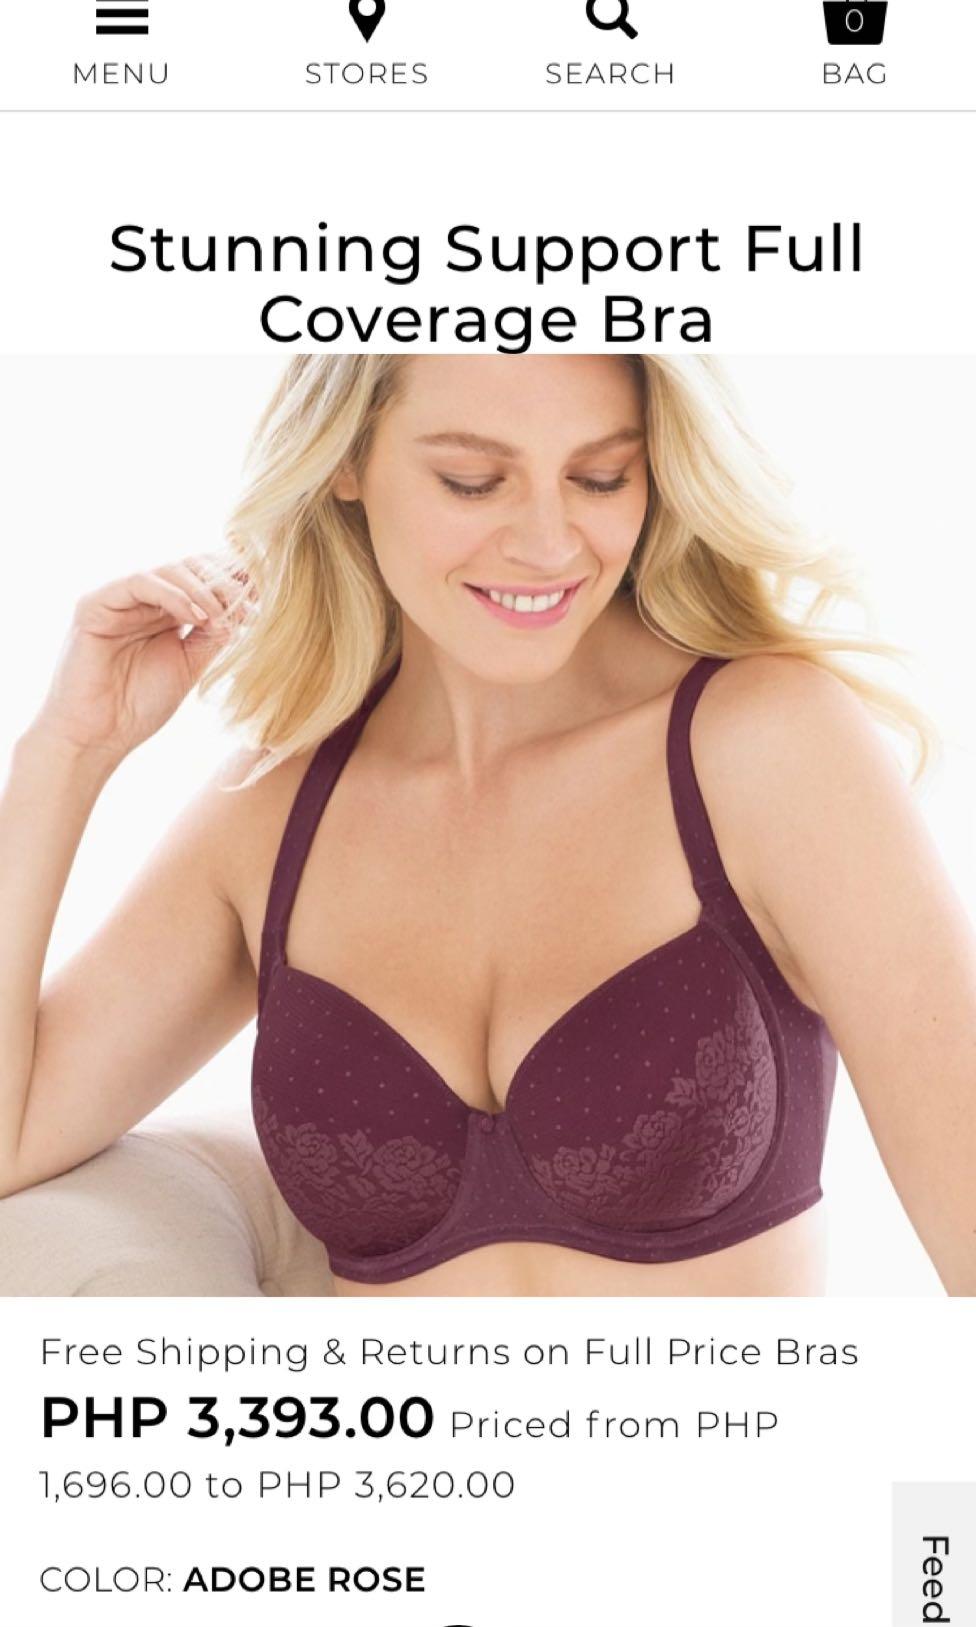 36C Soma Stunning Support Lace Full Coverage Bra, Women's Fashion